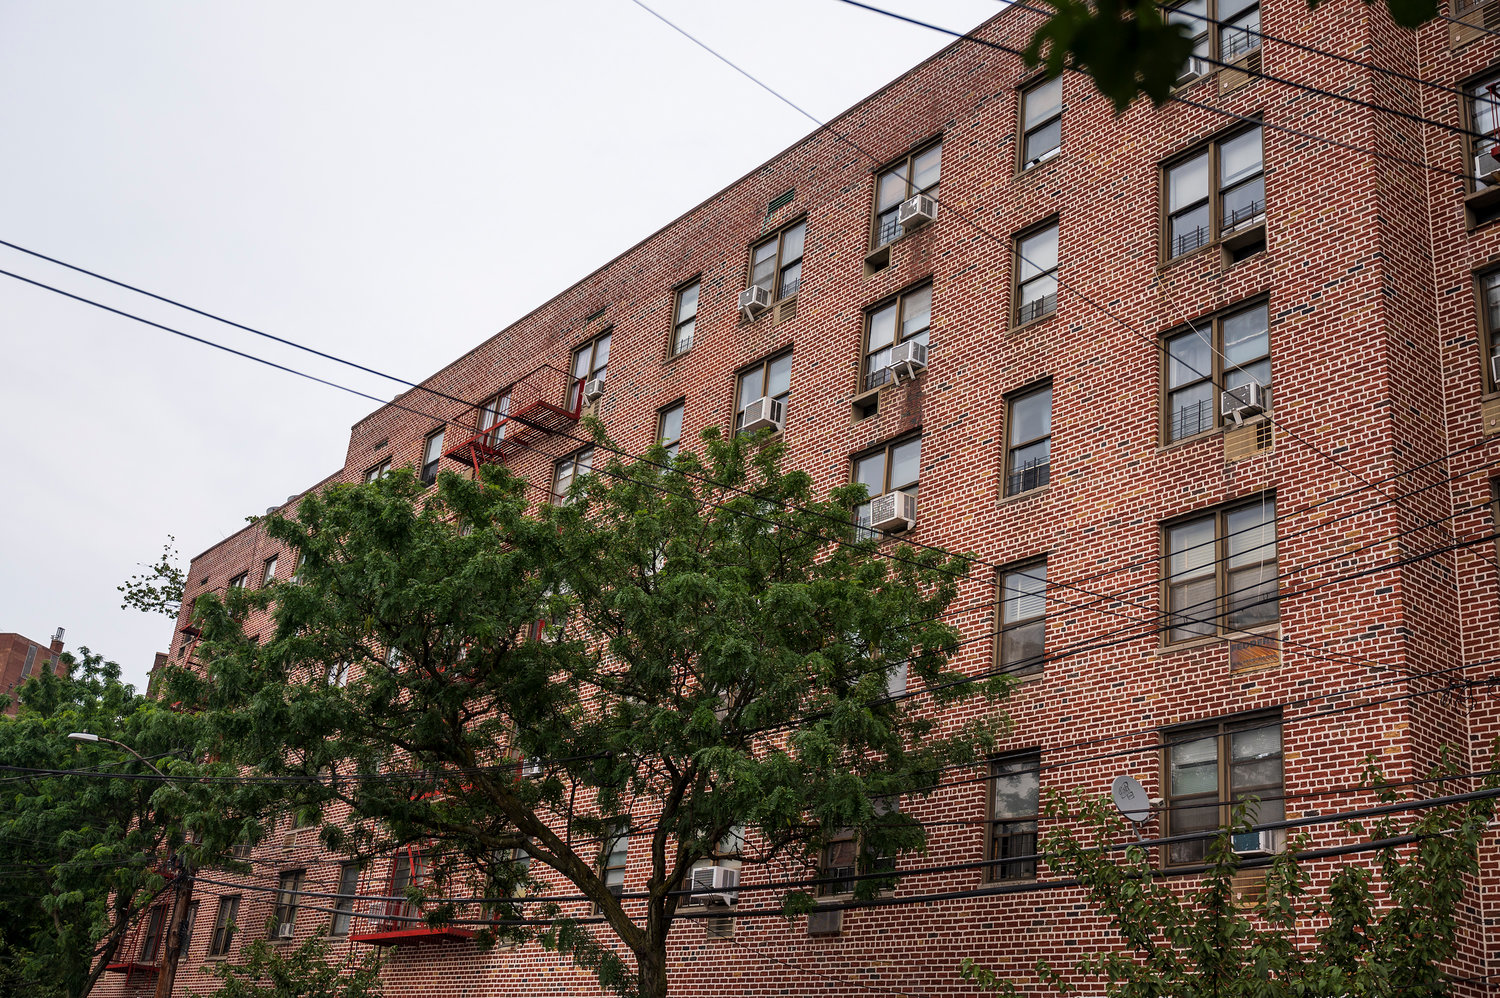 Miguelina Camilo changed her address from a home in New Jersey to this apartment complex at 3840 Orloff Ave. in the Bronx just two days before she became a vice chair of the Bronx Democratic Party.